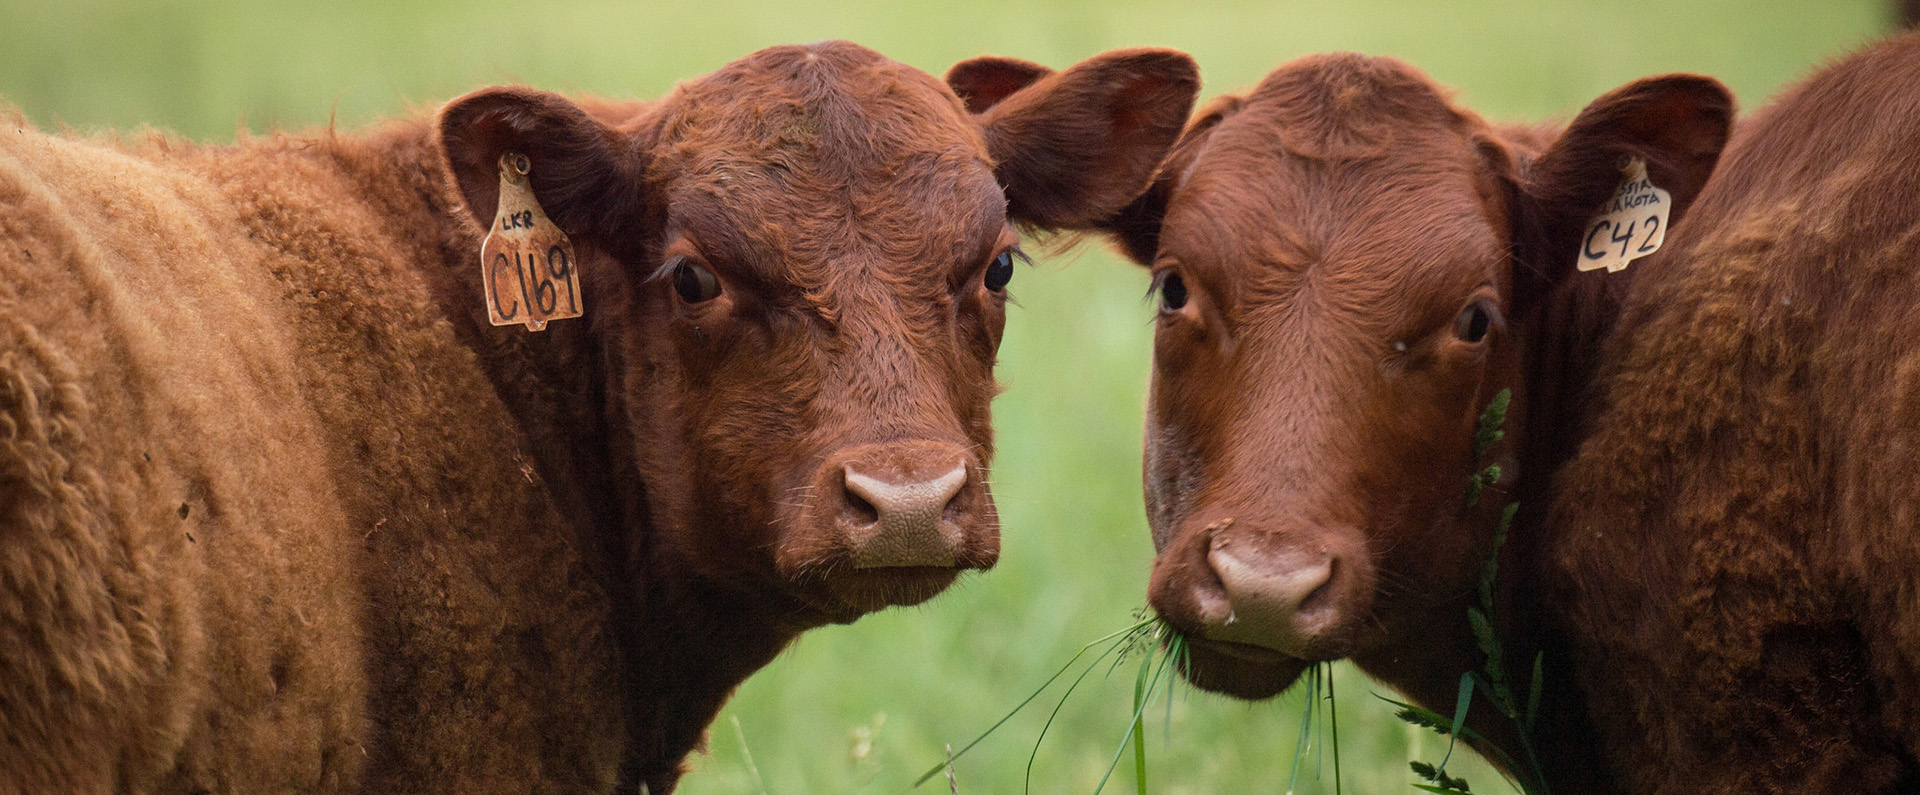 Two brown cows facing each other